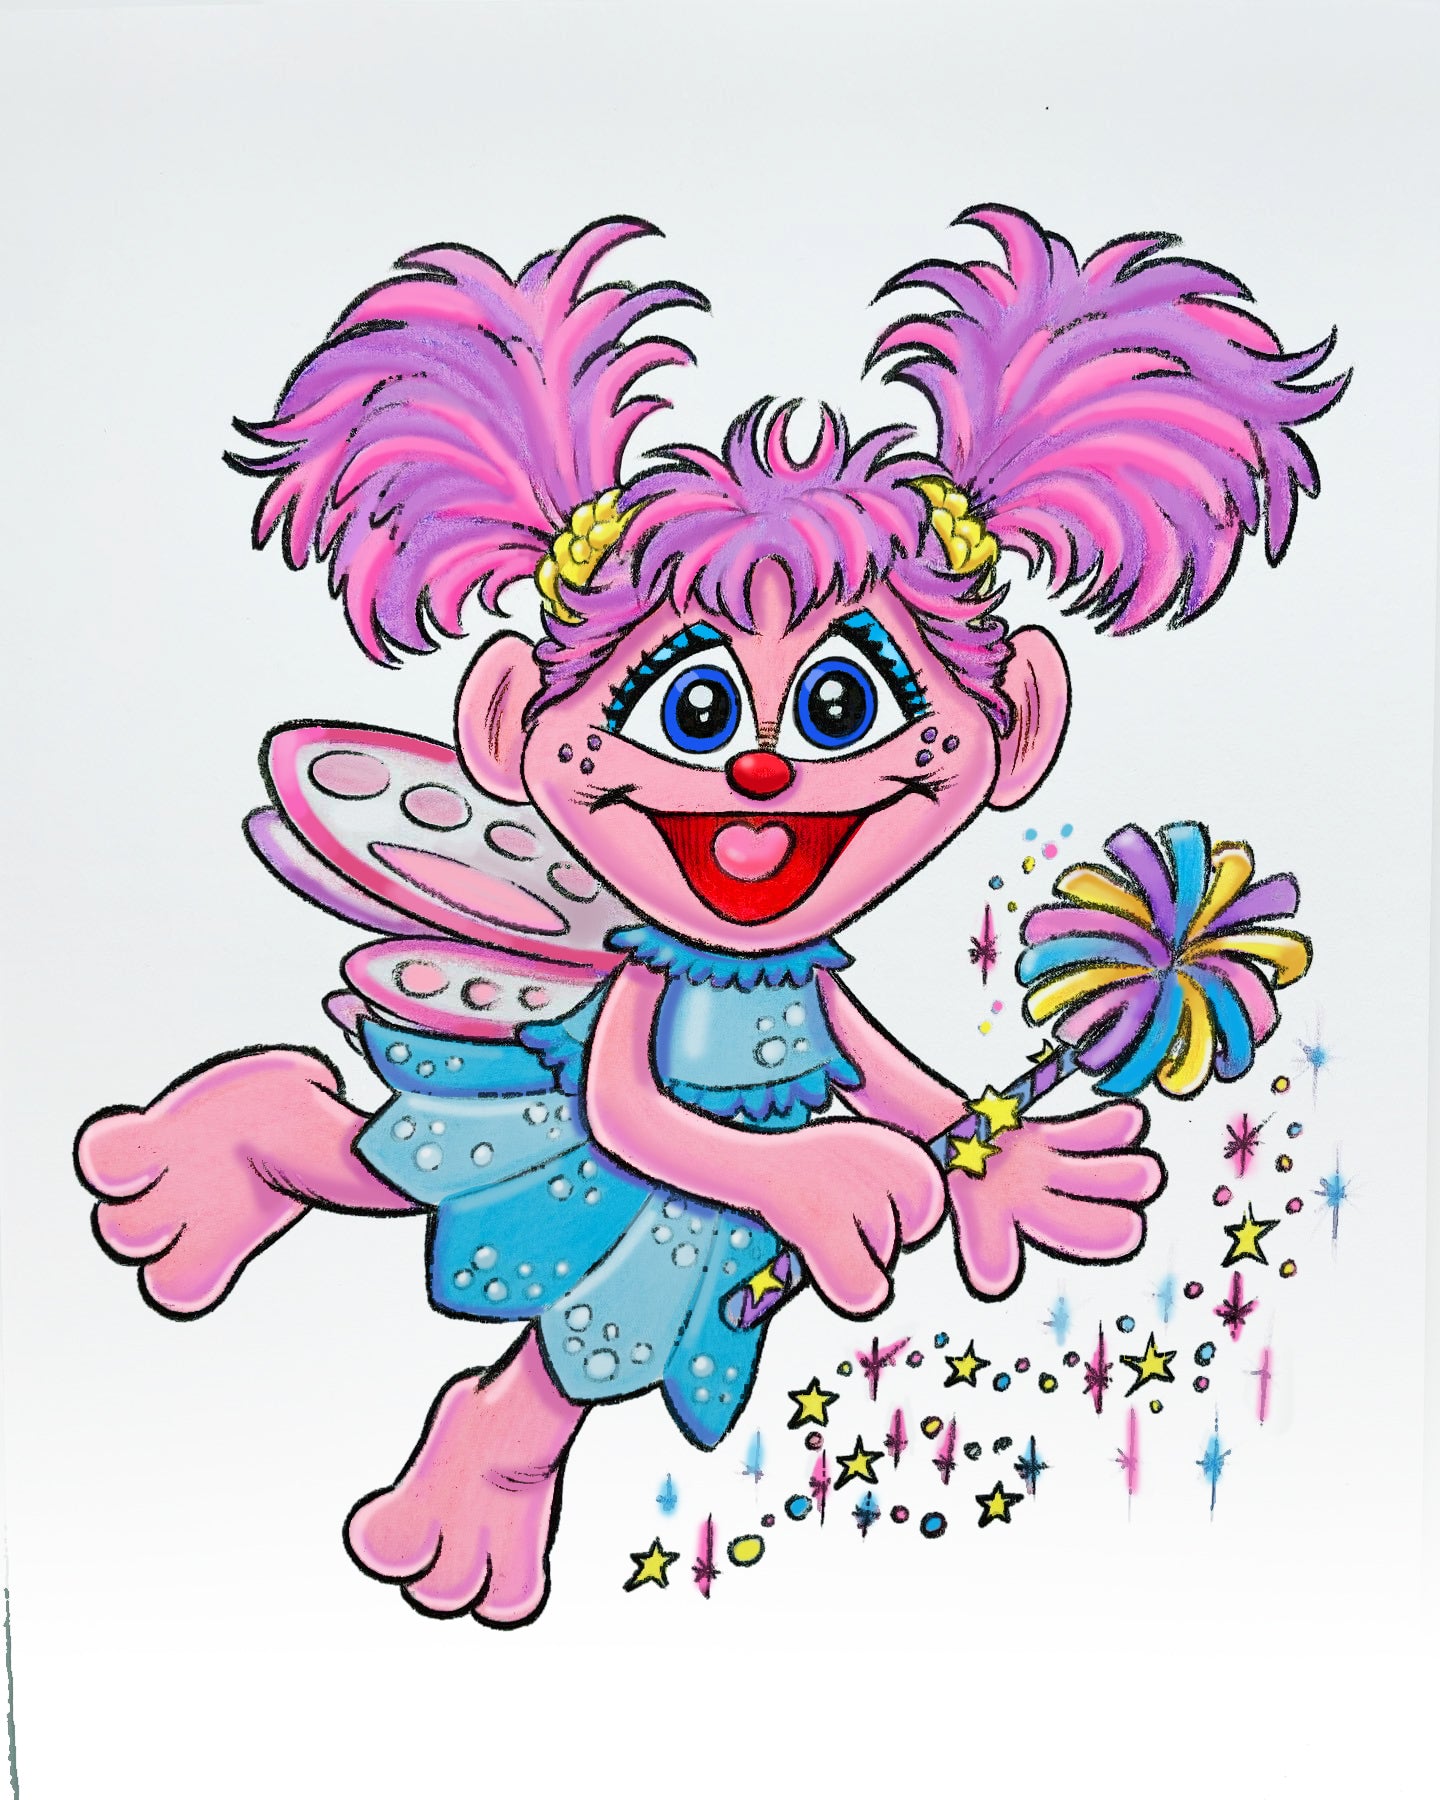 Abby Cadabby from Sesame Street Art Print - Created by Guy Gilchrist